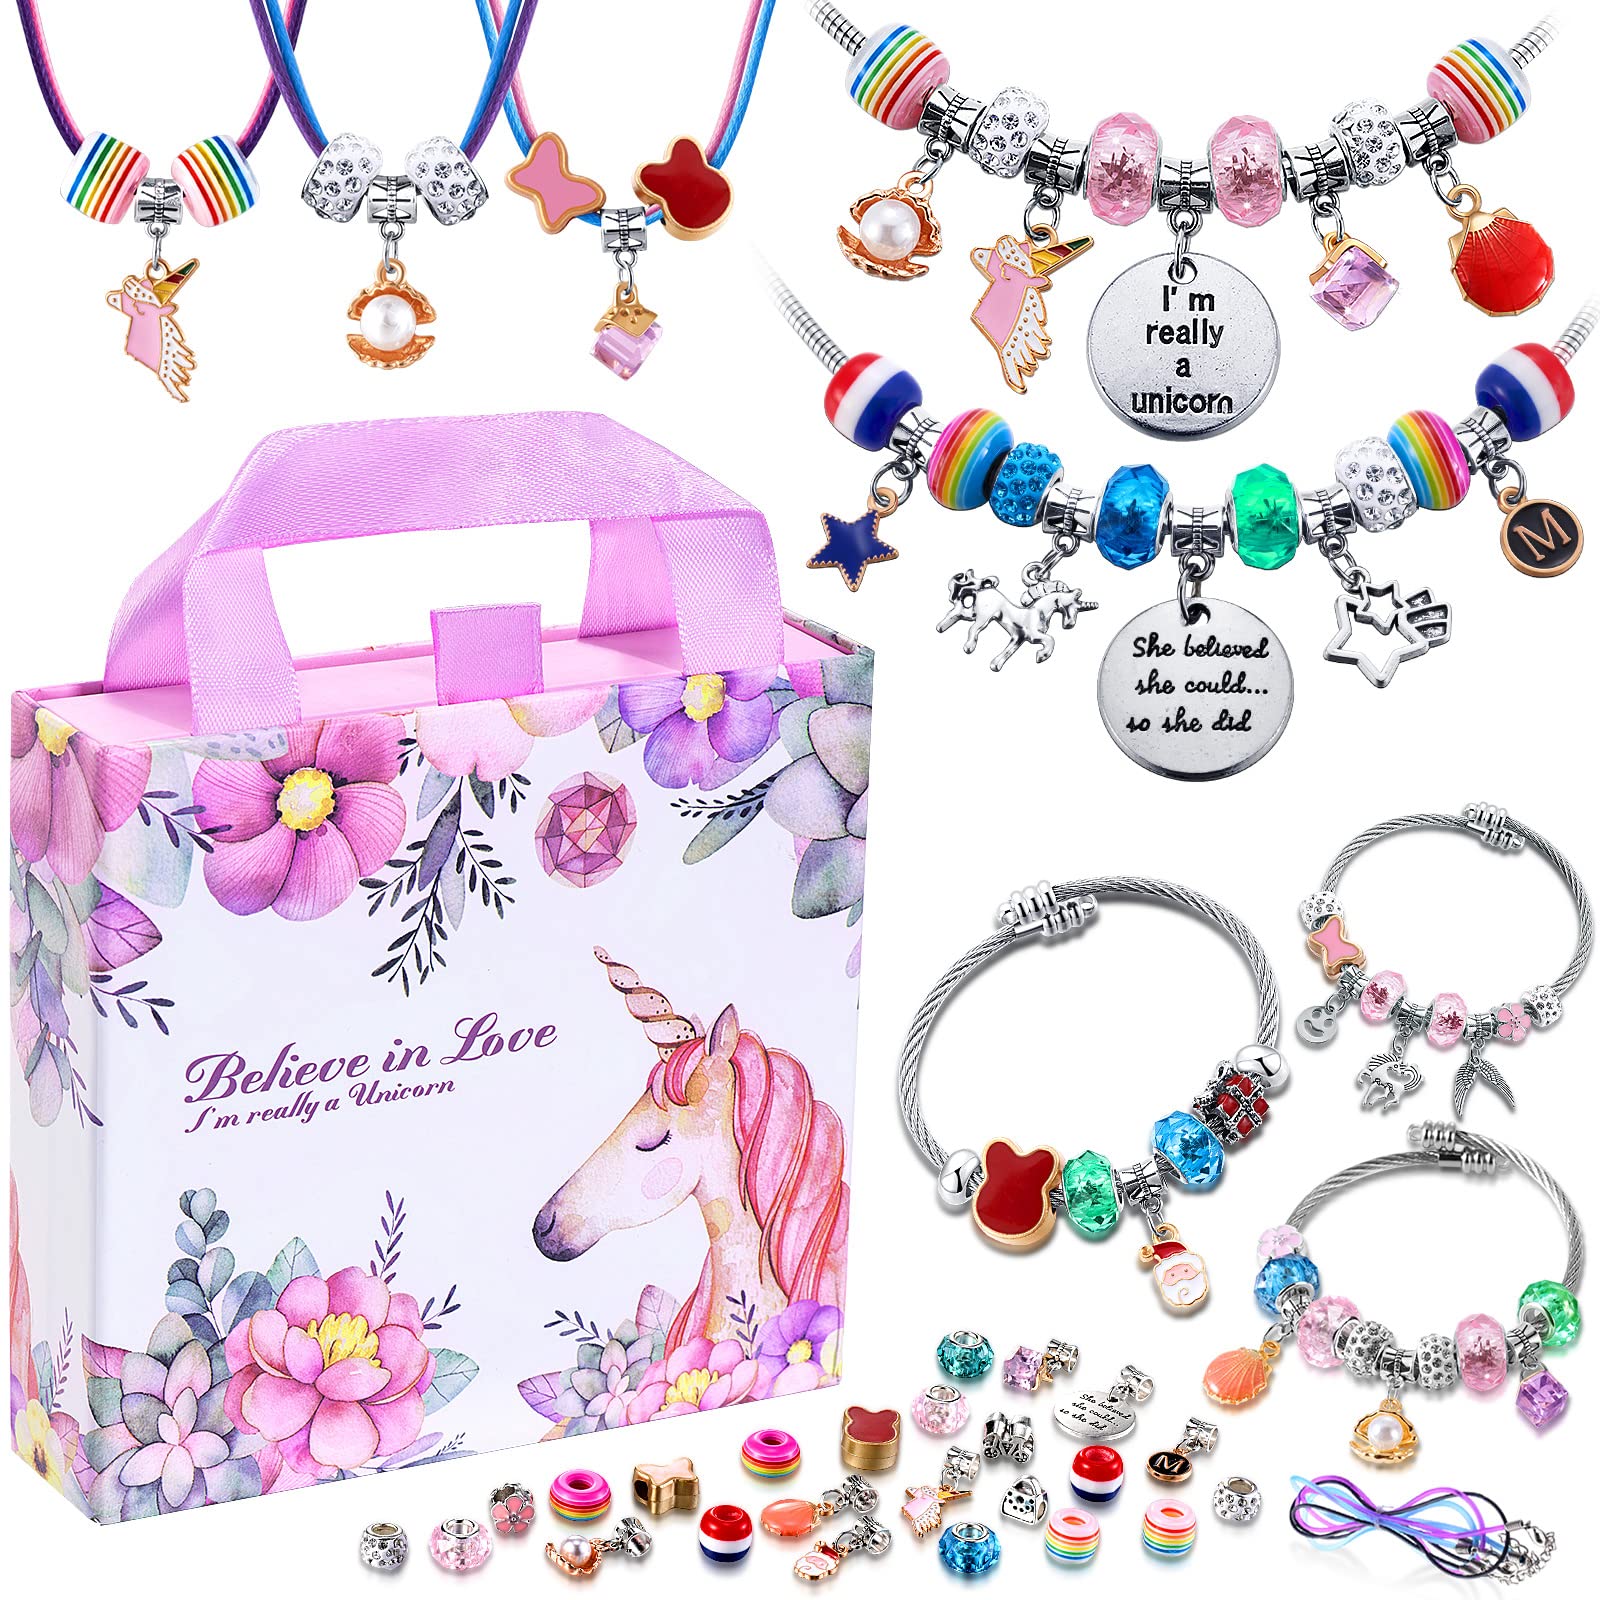 COO&KOO Charm Bracelet Making Kit, A Unicorn Girls Toy That Inspires Creativity and Imagination, Crafts for Ages 8-12 with Jewel